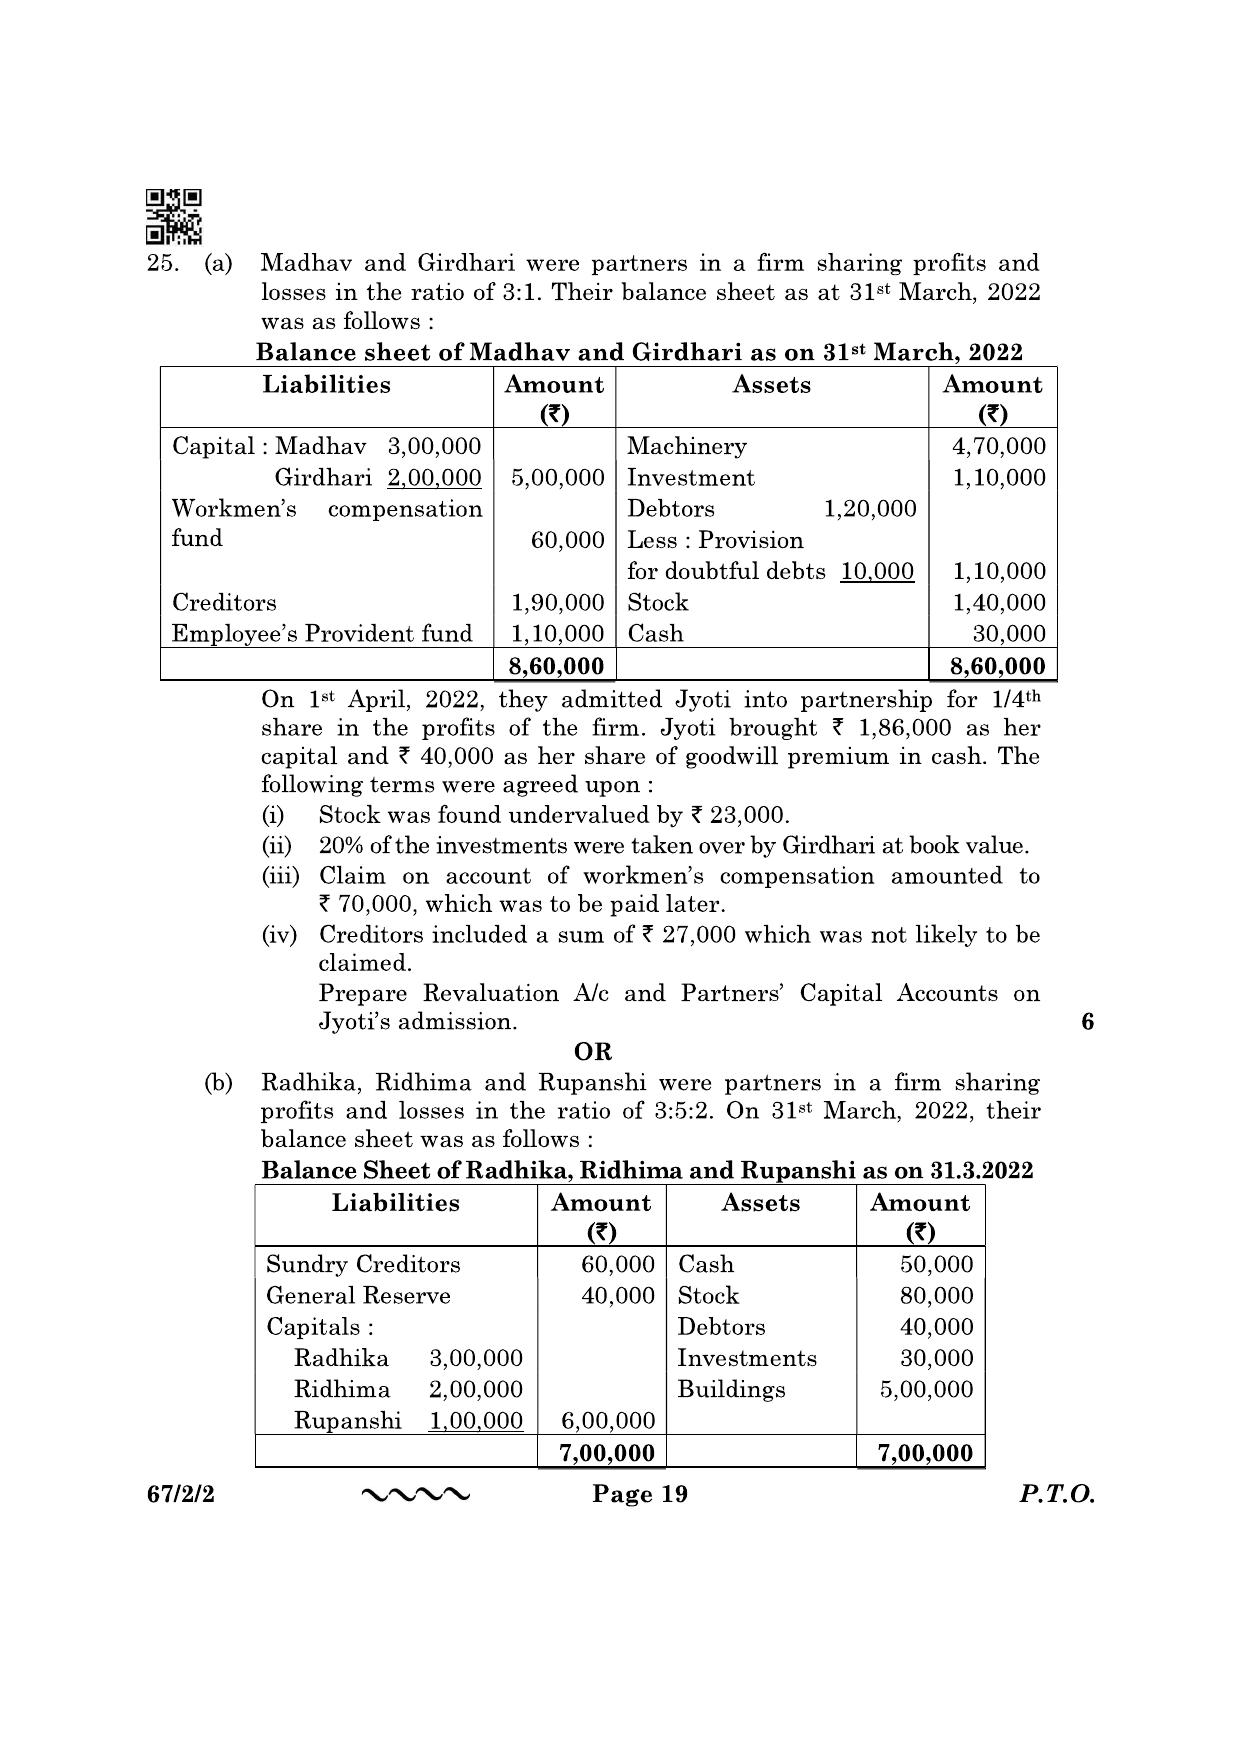 CBSE Class 12 67-2-2 Accountancy 2023 Question Paper - Page 19